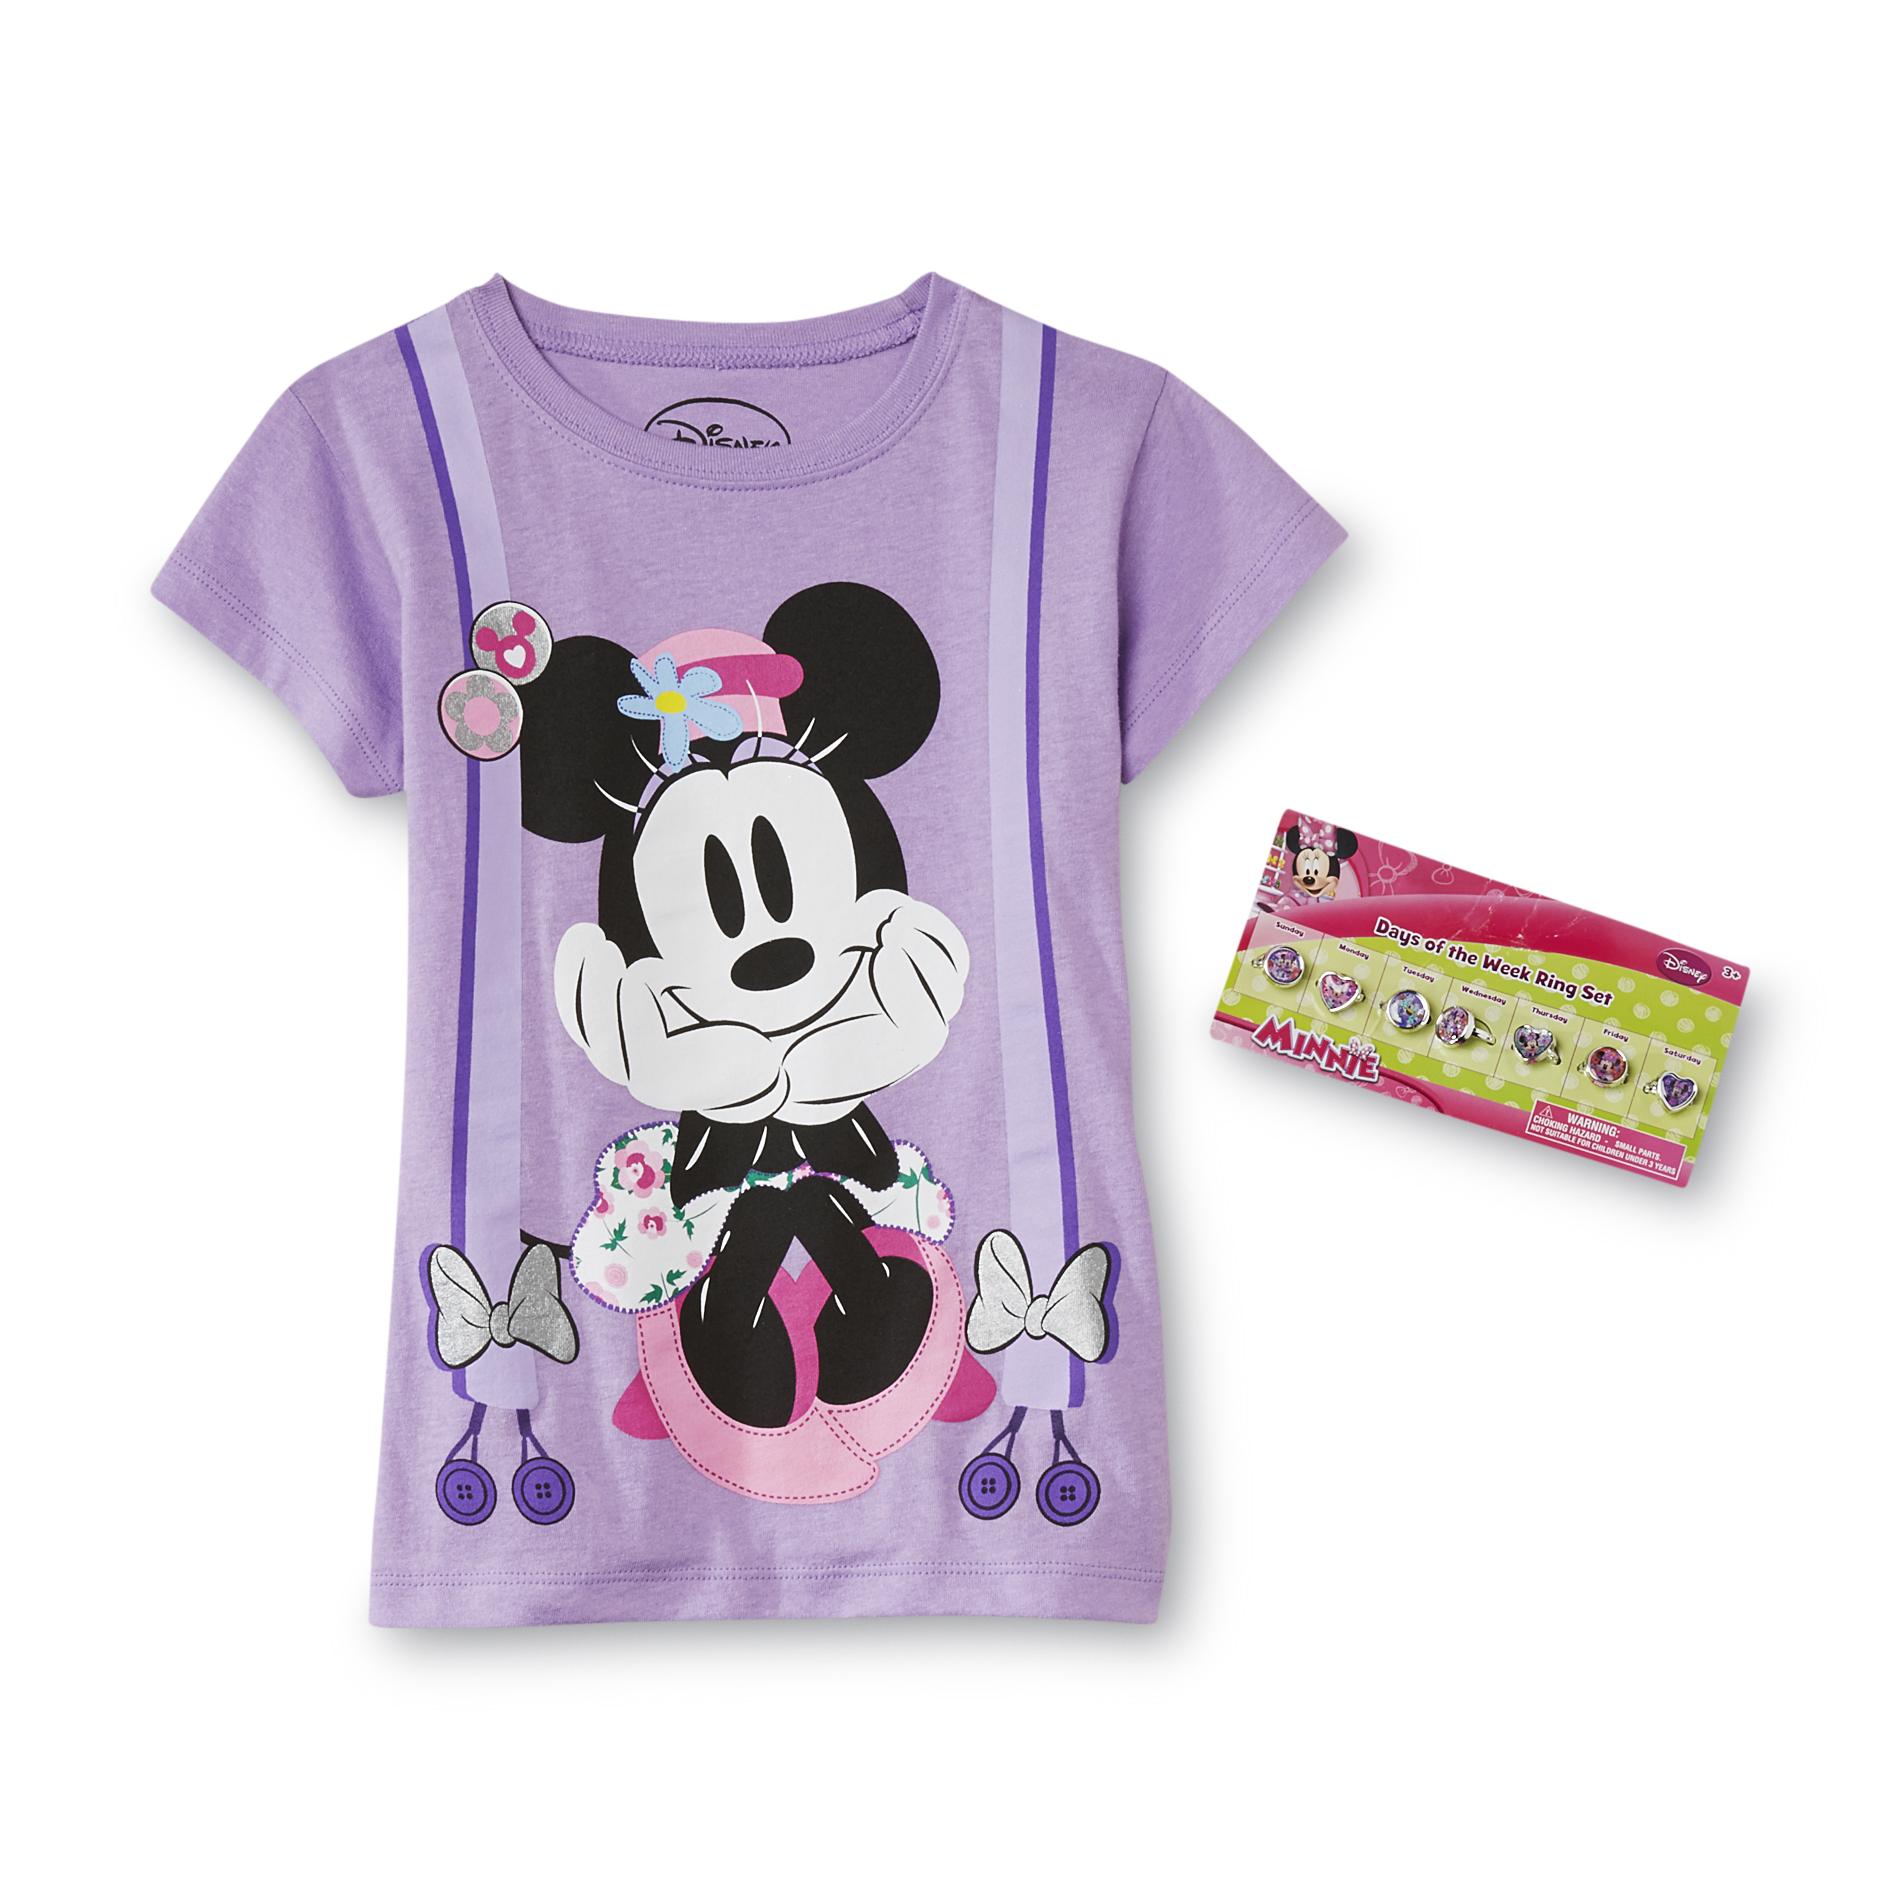 Disney Minnie Mouse Girl's T-Shirt & Rings